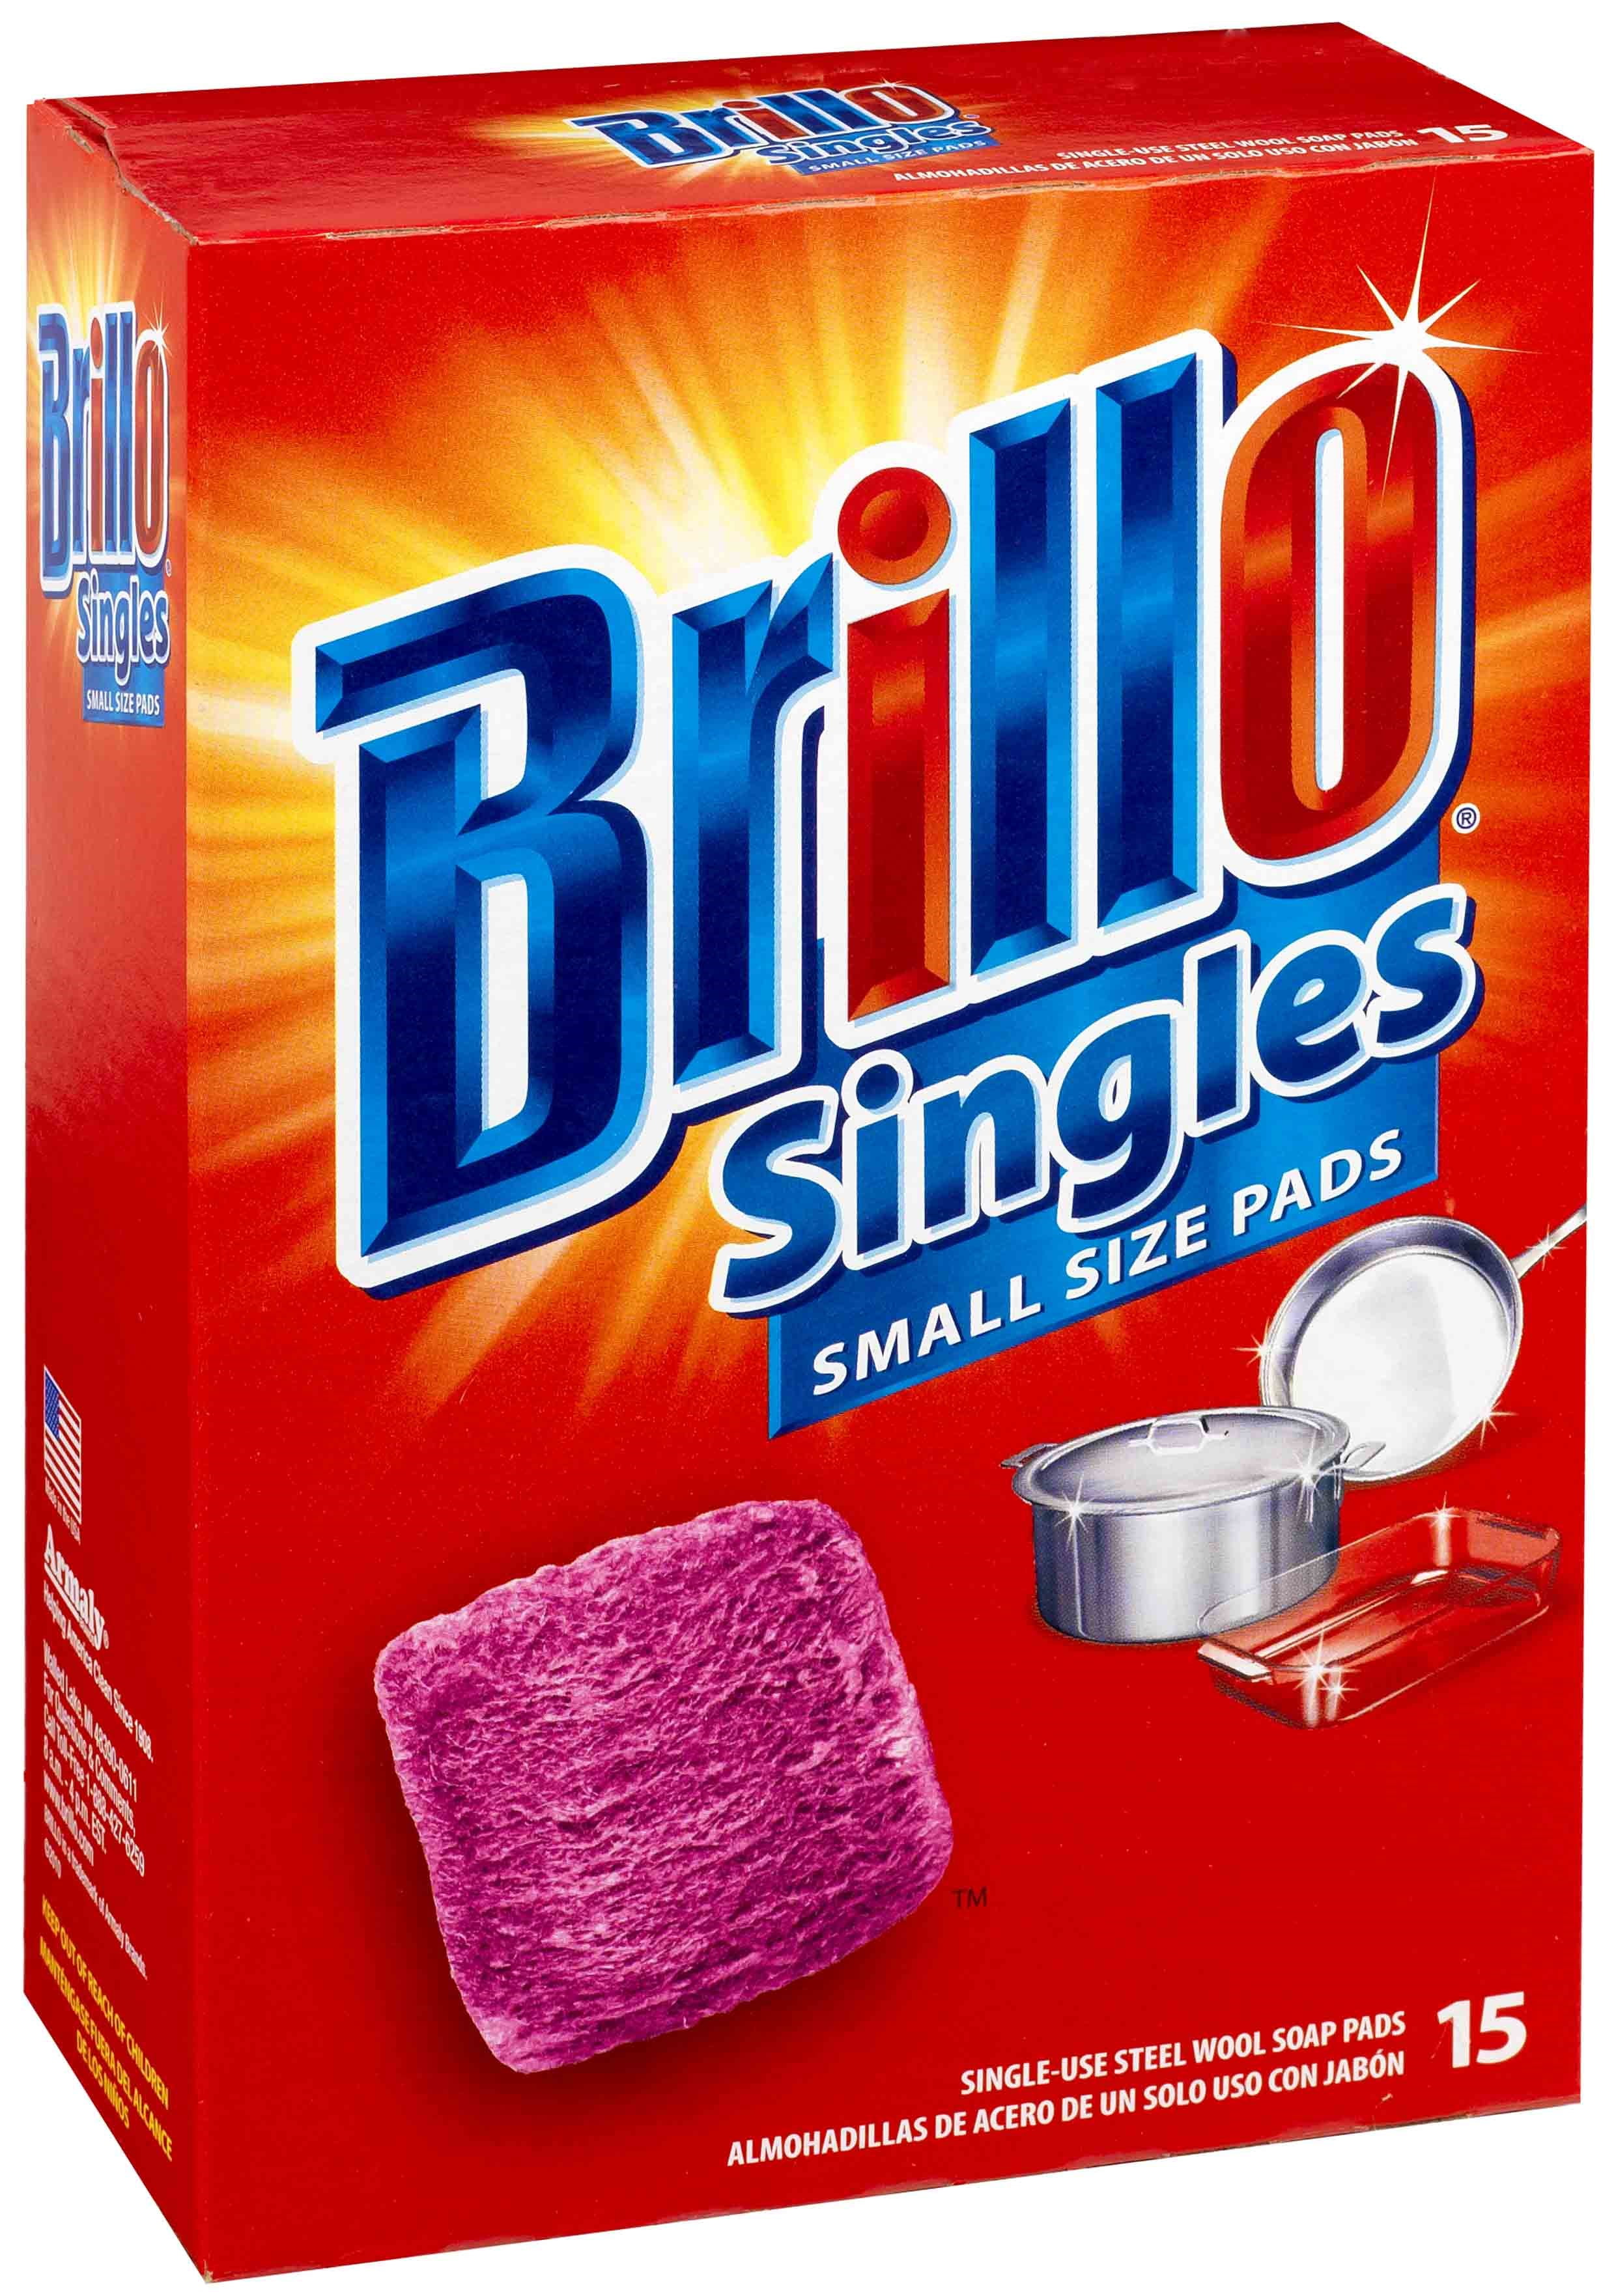  Brillo Single Use Steel Wool Soap Pads, Smaller Size Original  Red Scent, 15 Count Pack of 1 : Industrial & Scientific